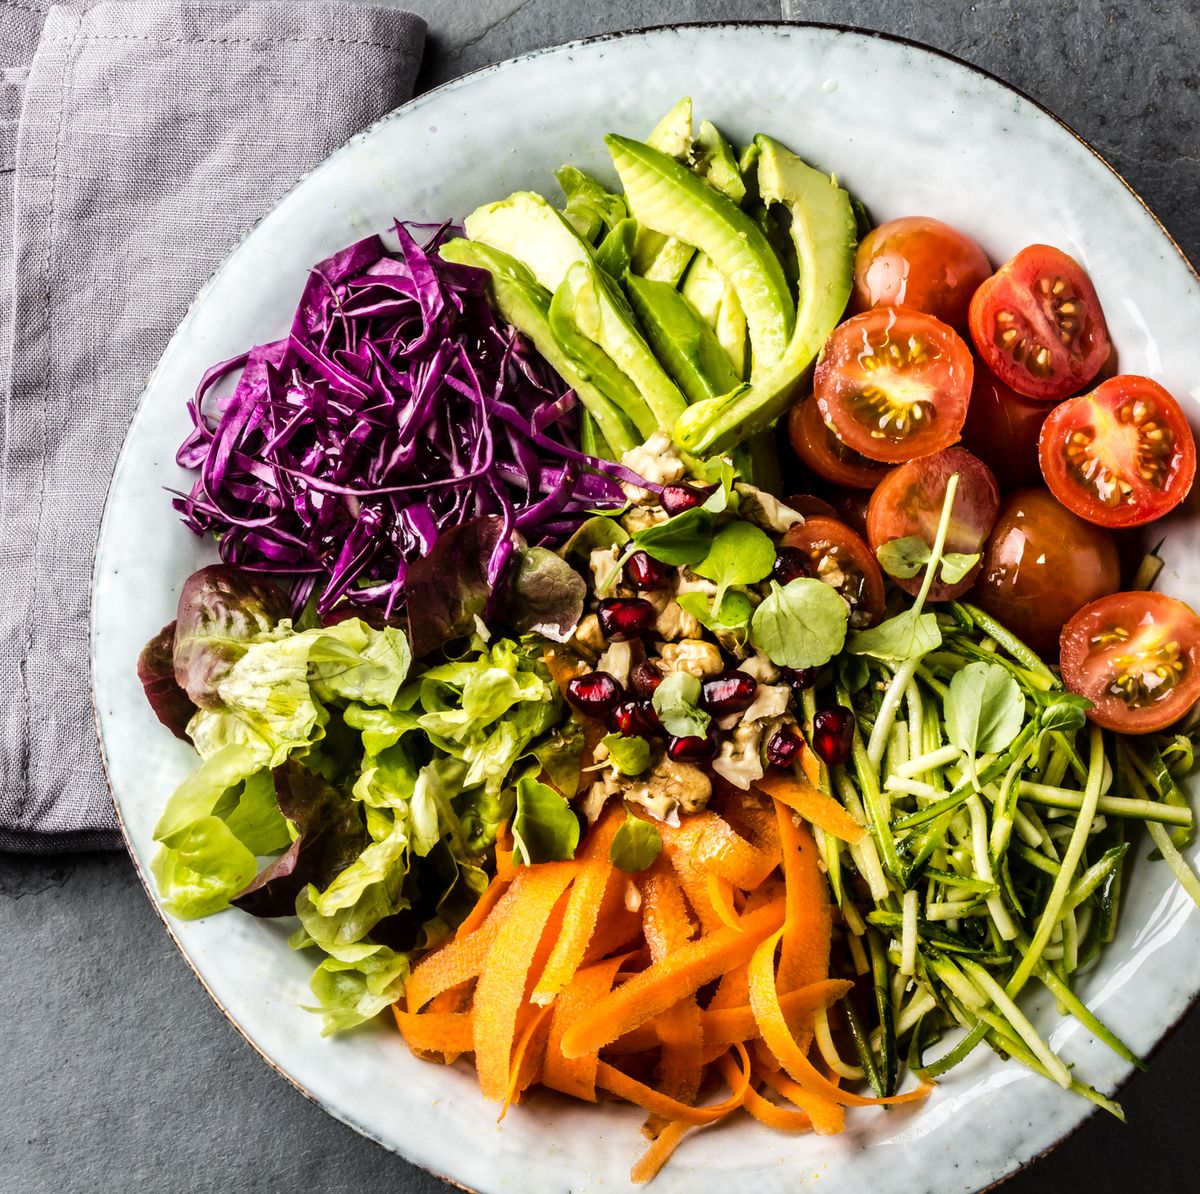 Vegan buddha bowl. Bowl with fresh raw vegetables - cabbage, carrot, zucchini, lettuce, watercress salad, tomatoes cherry and avocado, nuts and pomegranate